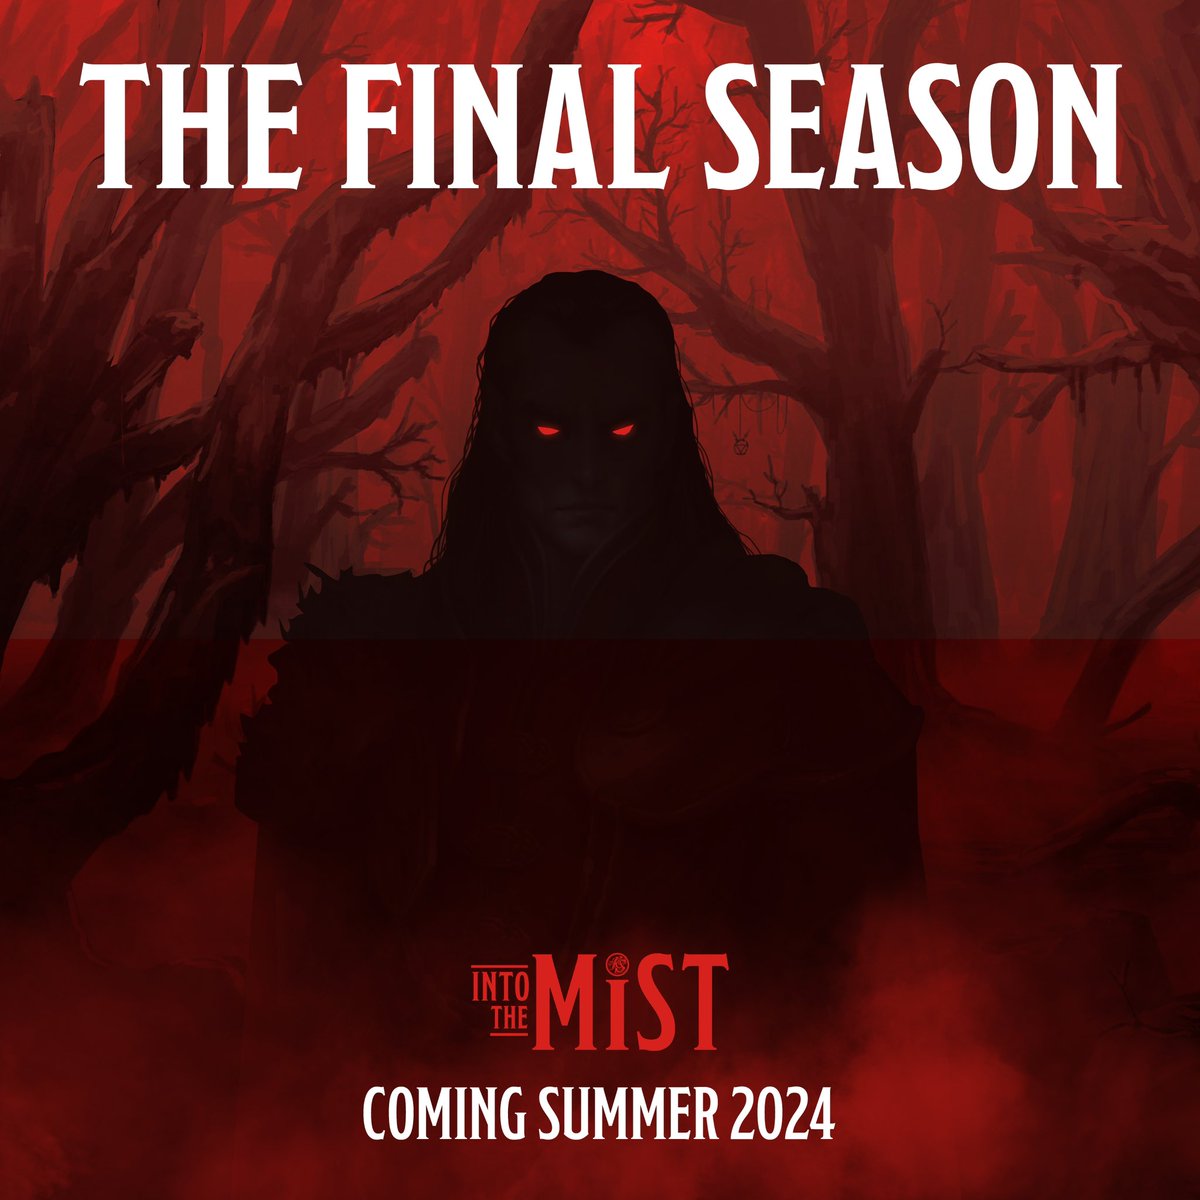 🚨OFFICIAL BINGE WARNING!🚨 This is your 5 month heads up to catch up on seasons 1-5 of #intothemist Don’t miss out on watching live to take part in our epic giveaways every episode! #Dnd #dnd5e #dungeonsanddragons #ttrpg #tabletoprpg #actualplay #curseofstrahd #intothemist